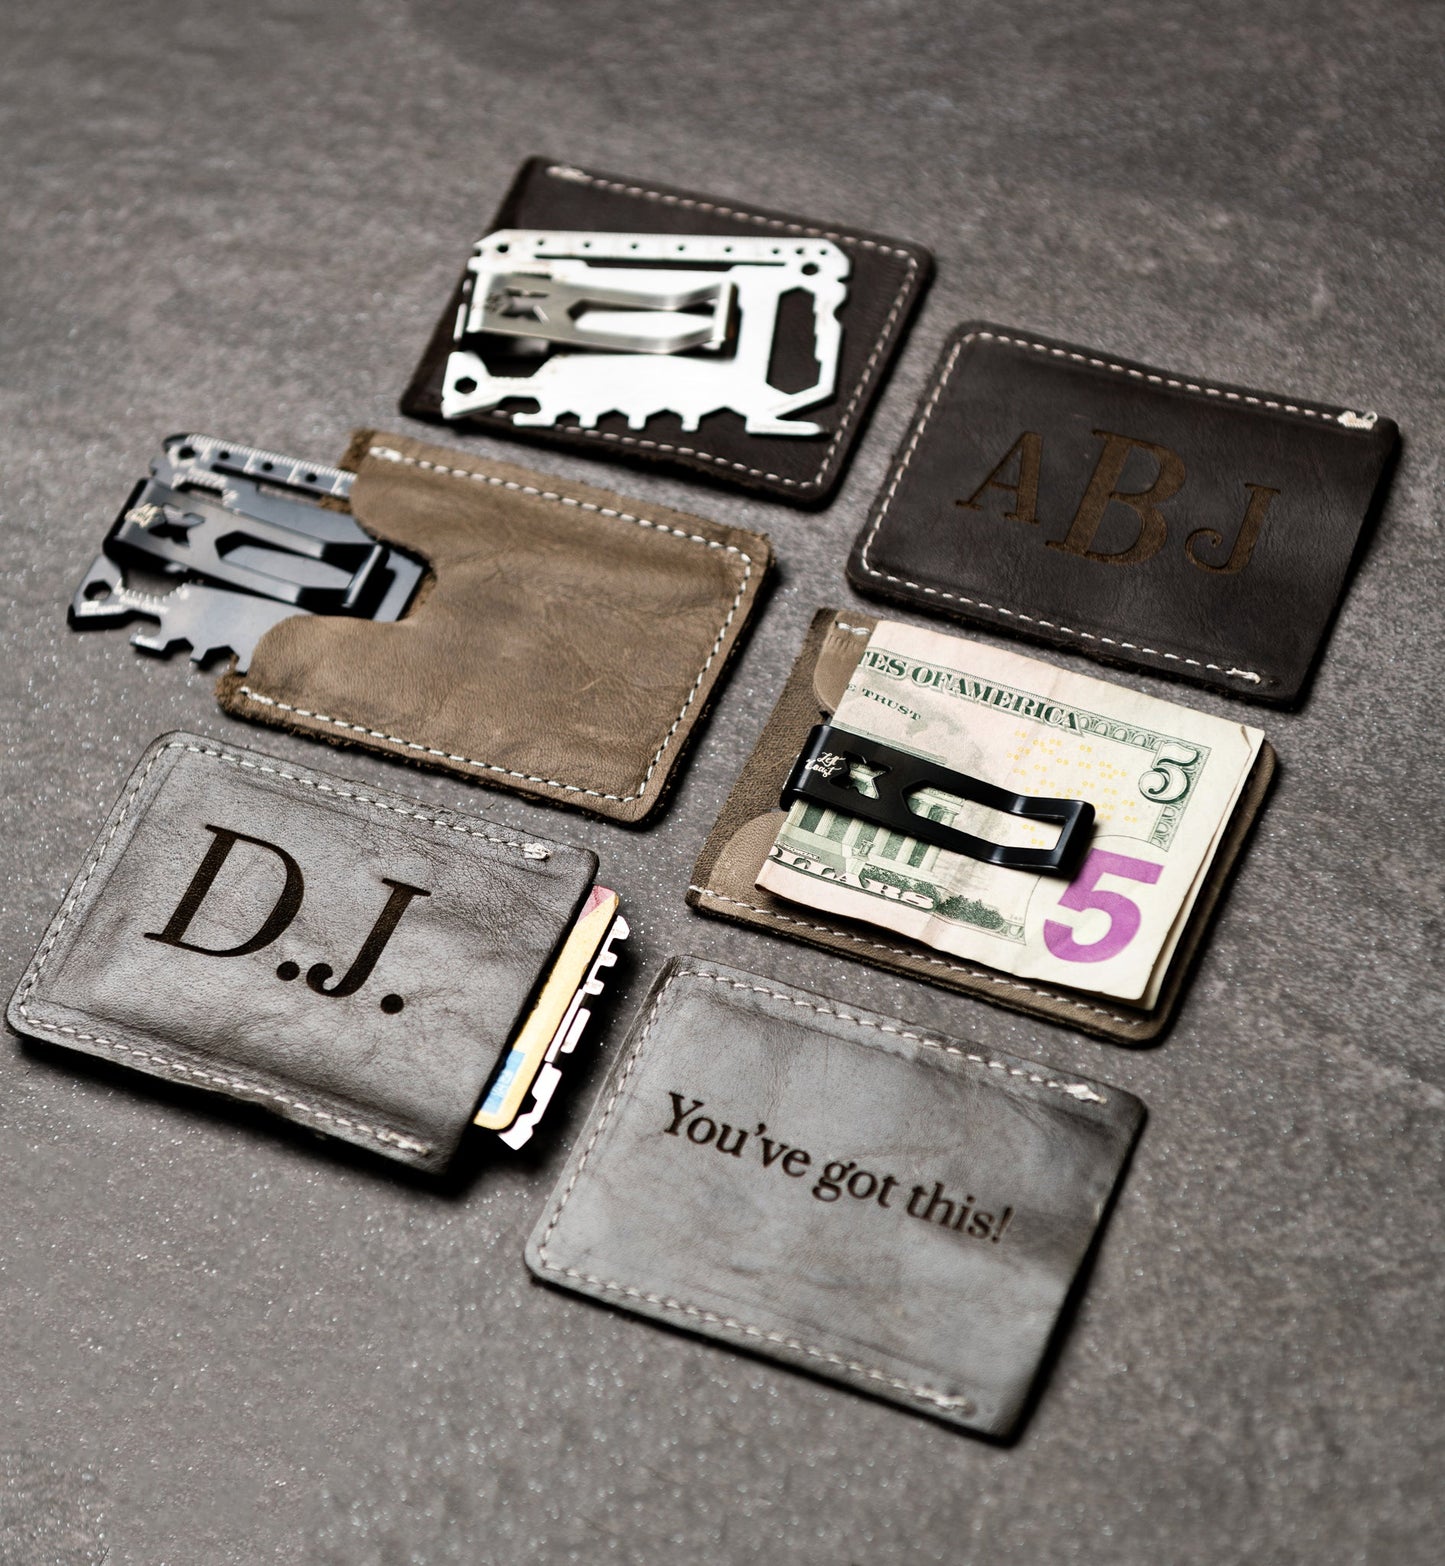 MultiTool Card with Distressed Leather Sleeve